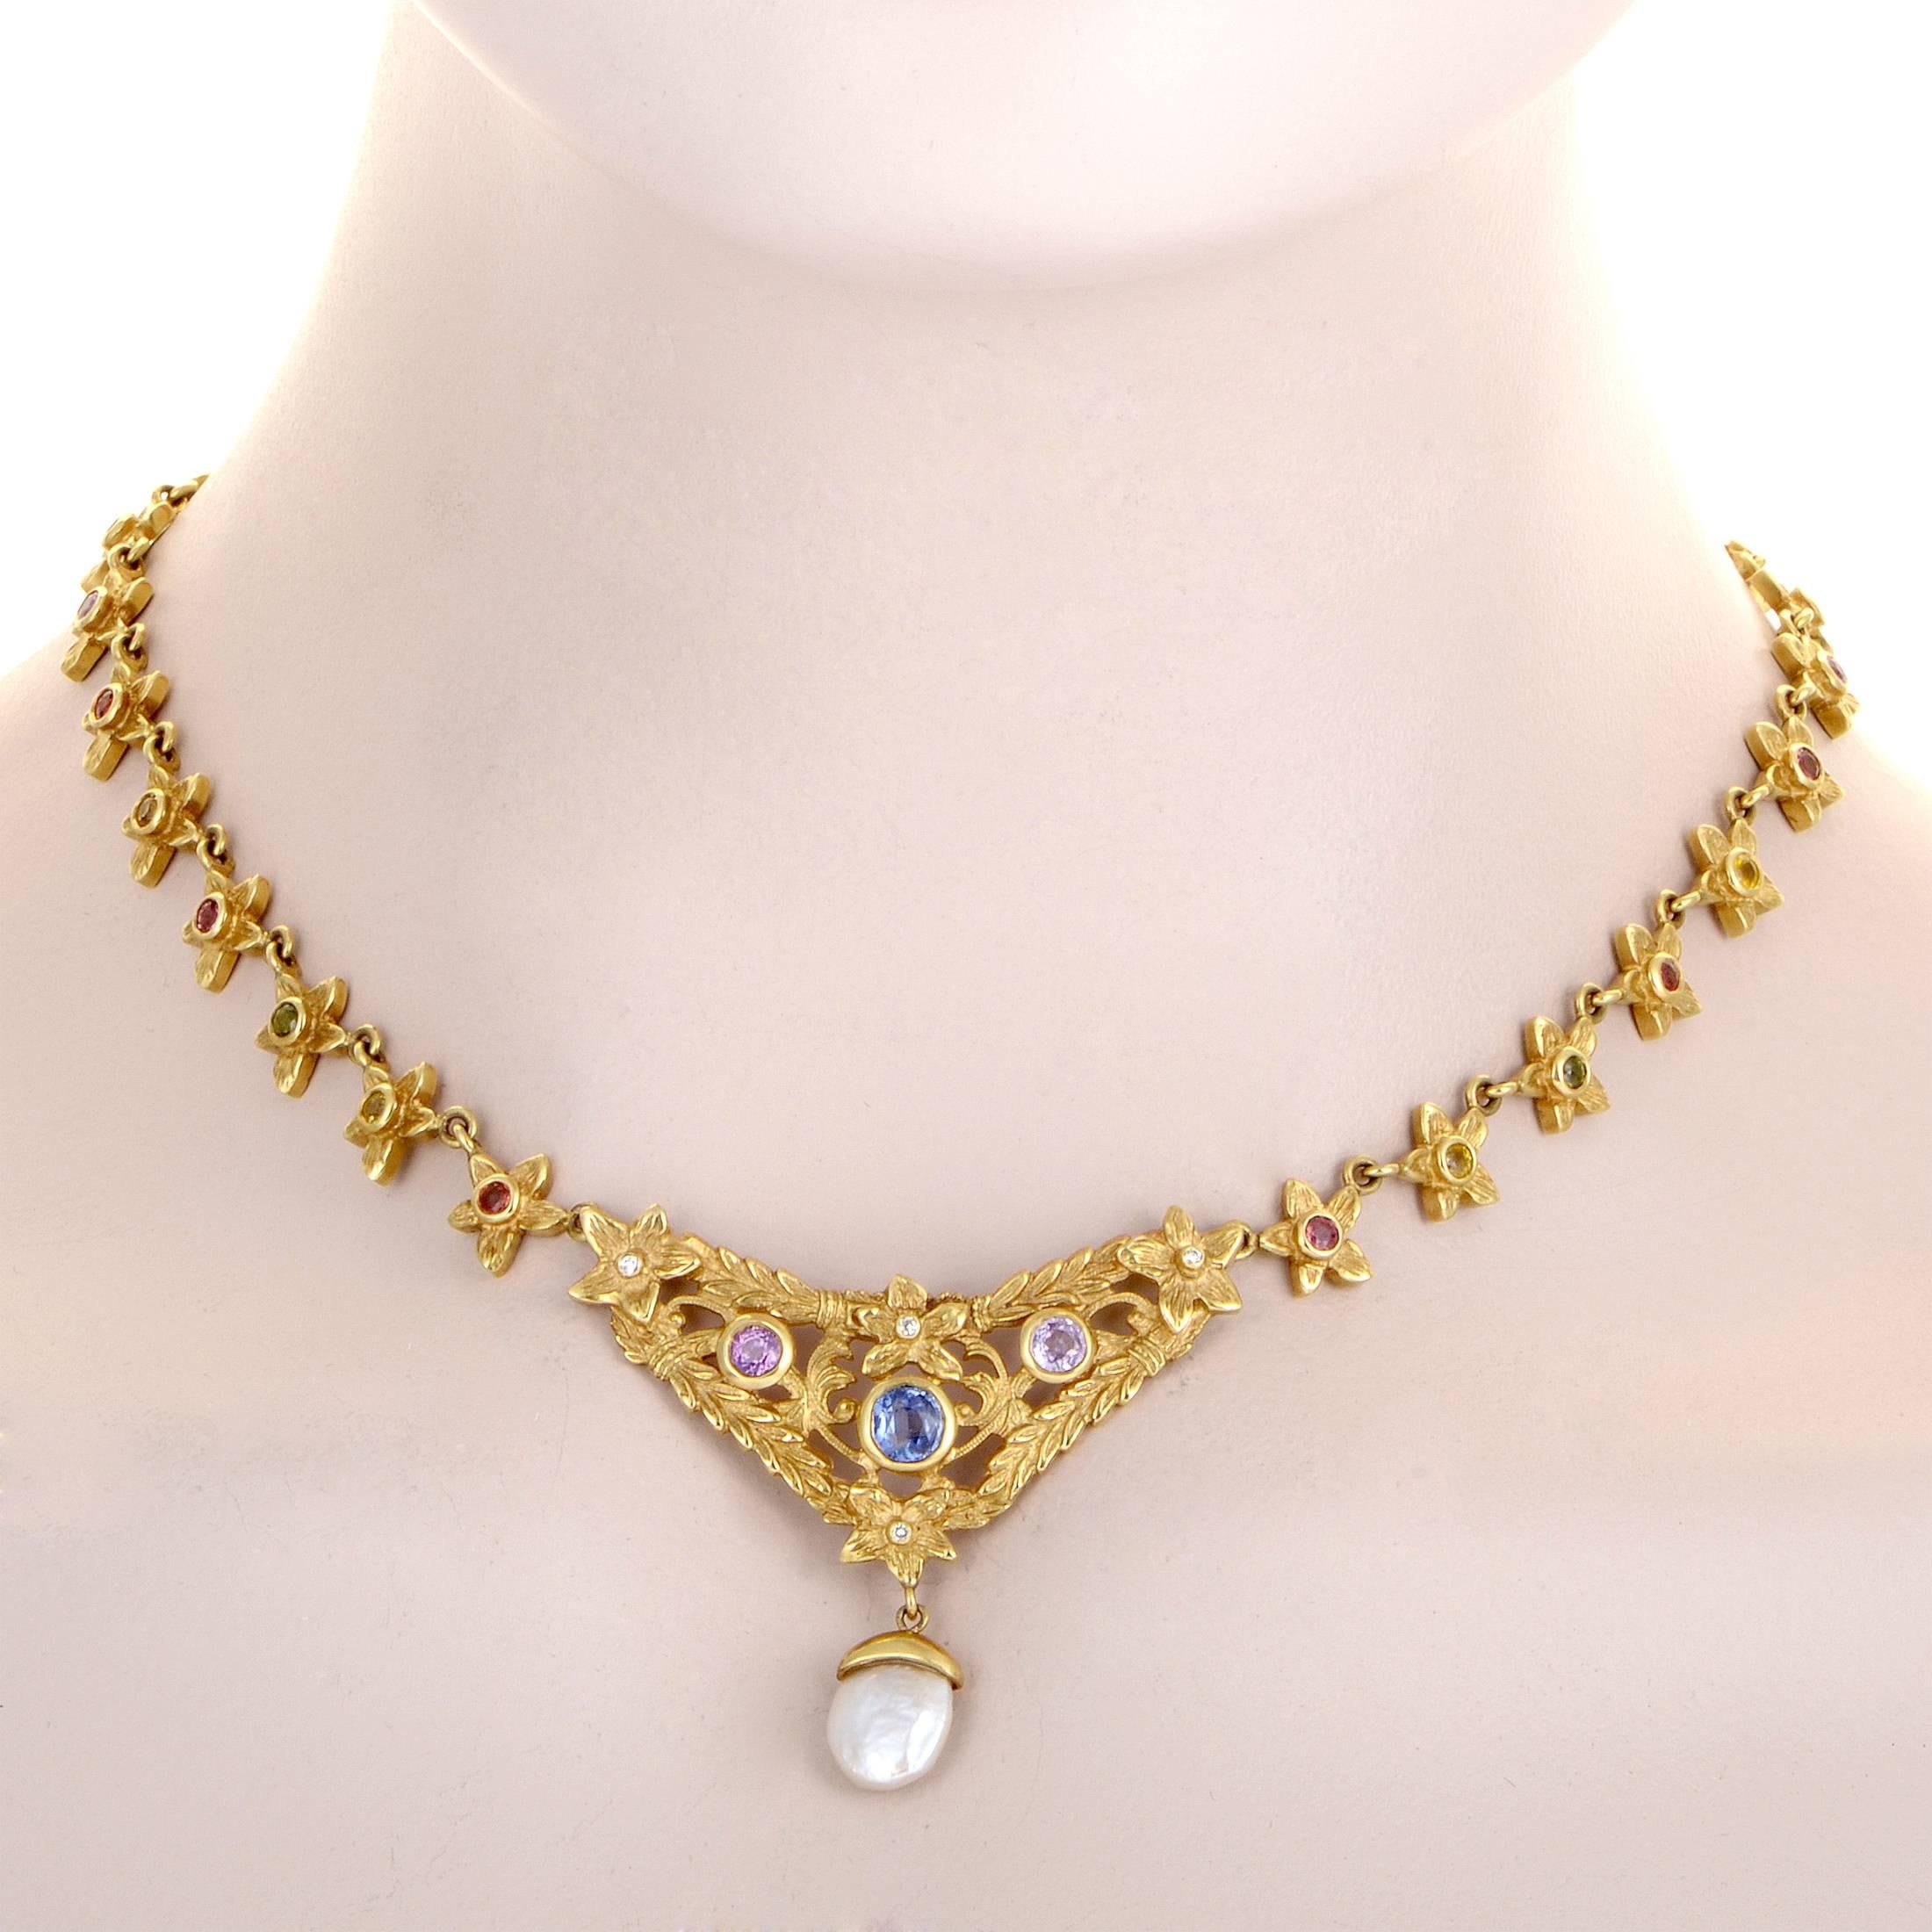 Lavishly ornate and boasting a tasteful blend of precious materials, this spellbinding necklace from Loree Rodkin is expertly crafted from 18K yellow gold and embellished with lustrous diamonds as well as numerous multicolored gems while a tender